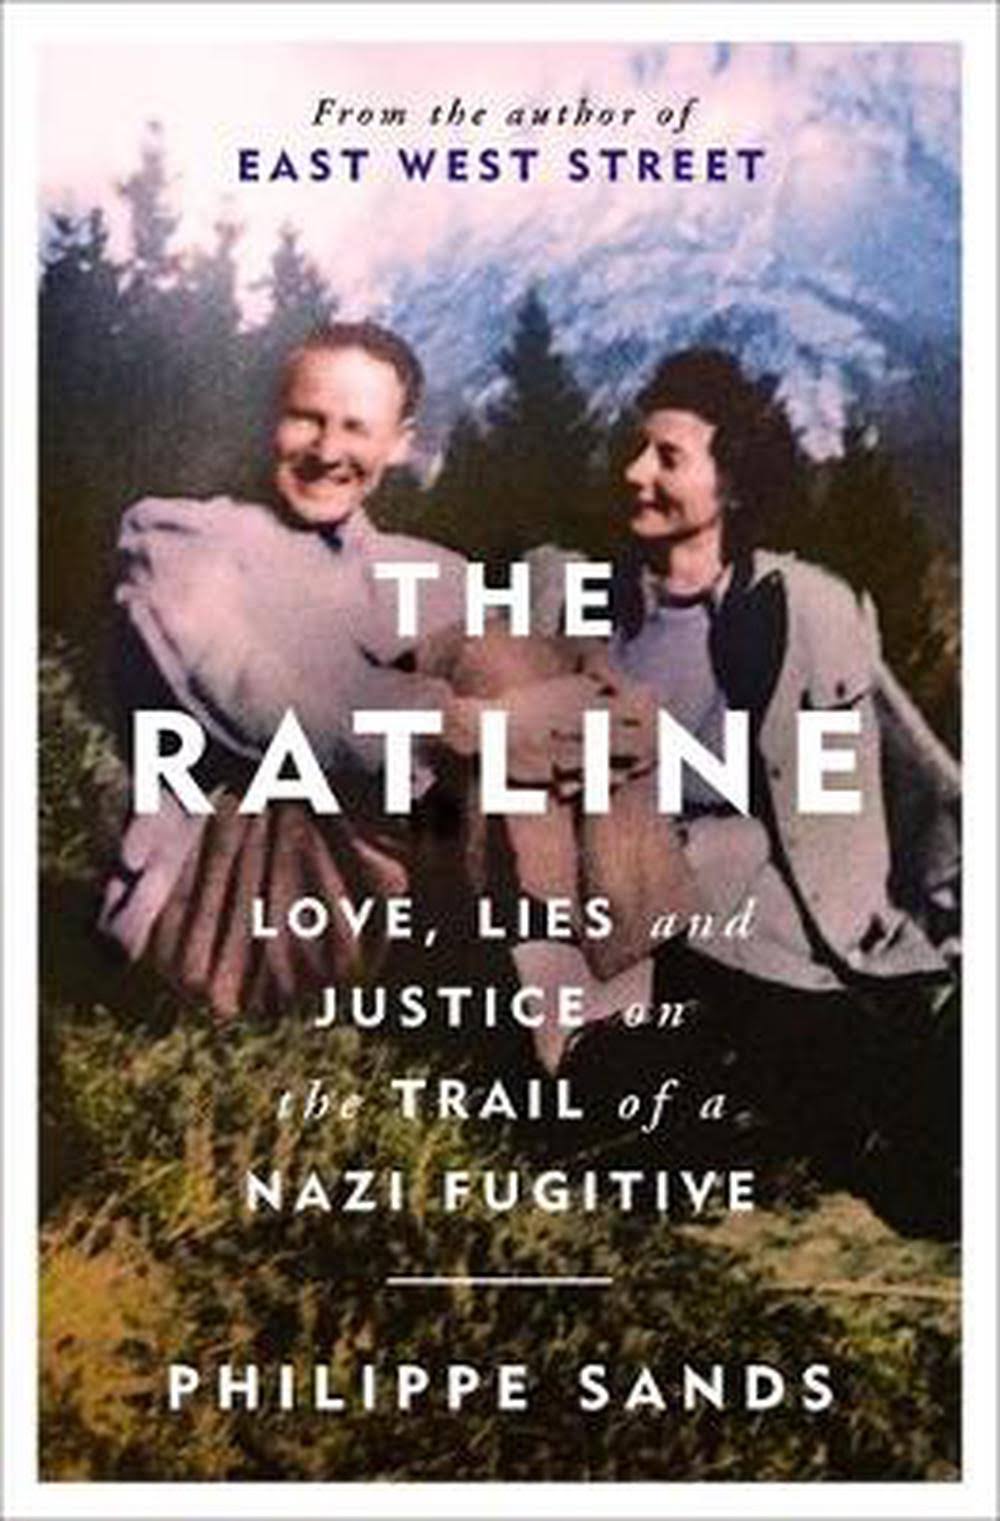 Ratline by Philippe Sands: Love, Lies and Justice On The Trail of A Nazi Fugitive